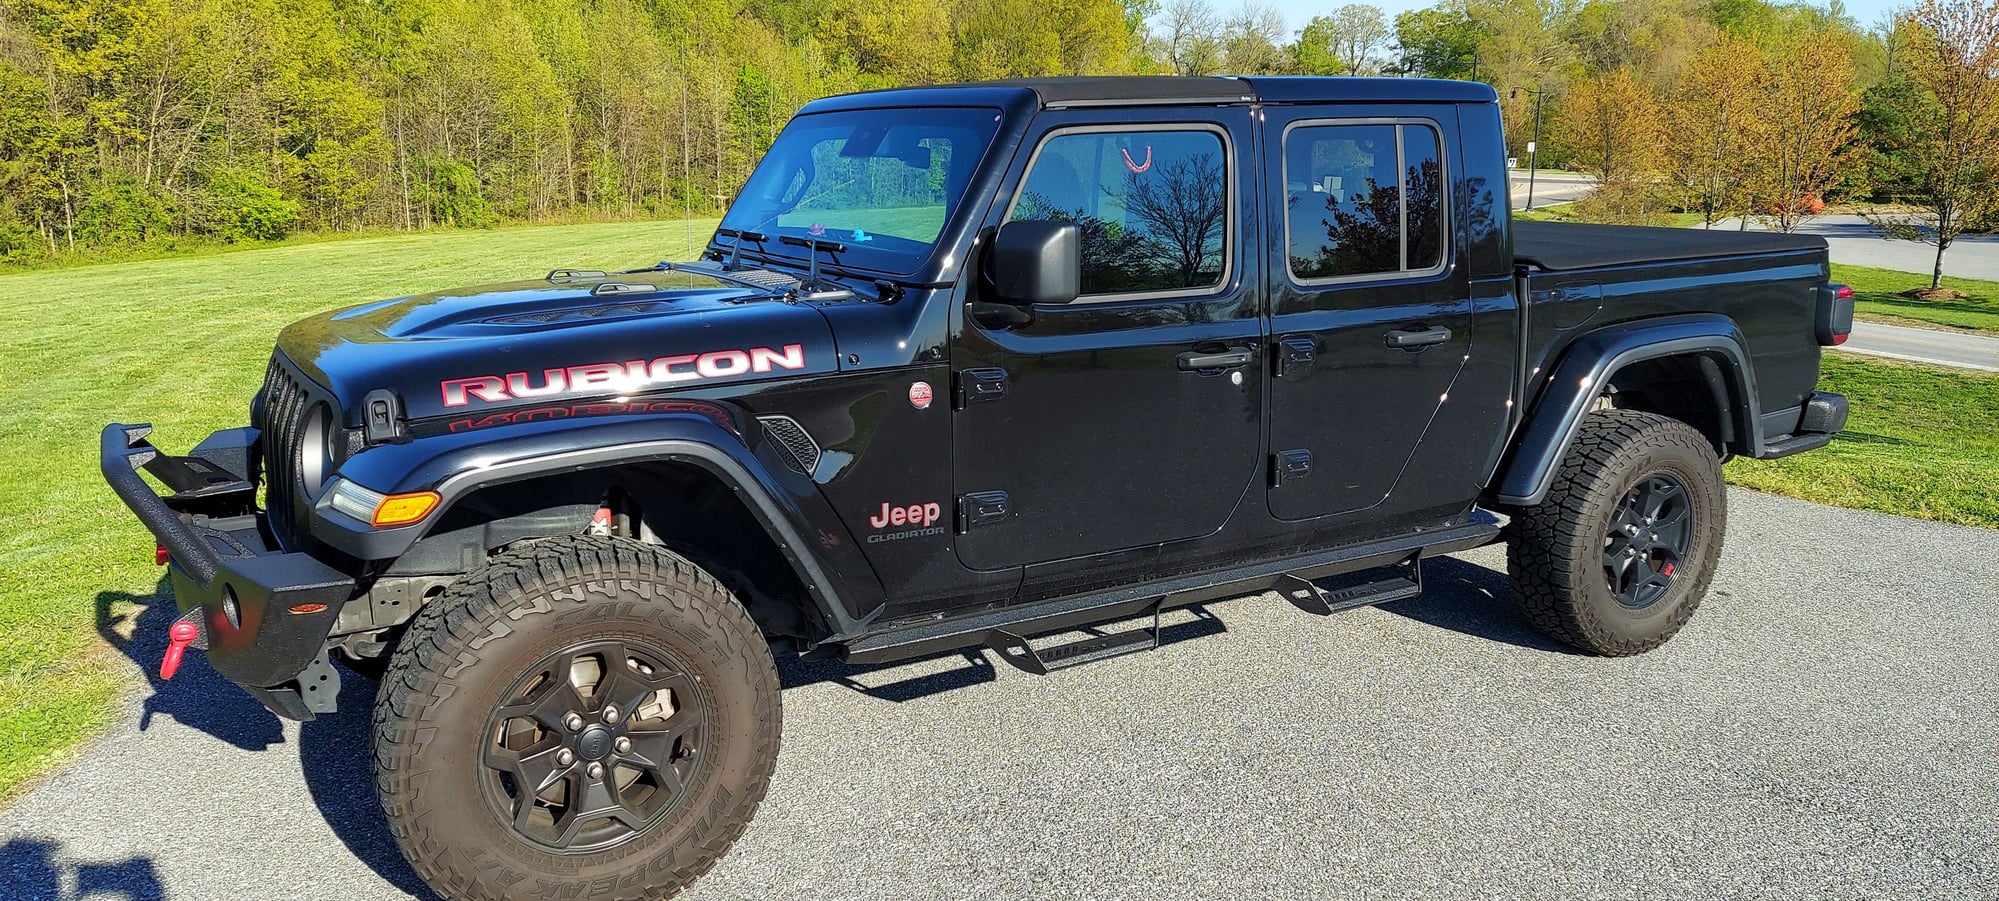 Wheels and Tires/Axles - JT Rubicon LE OEM Tires x 4 - Used - 2007 to 2018 Jeep Wrangler - New Castle, DE 19720, United States